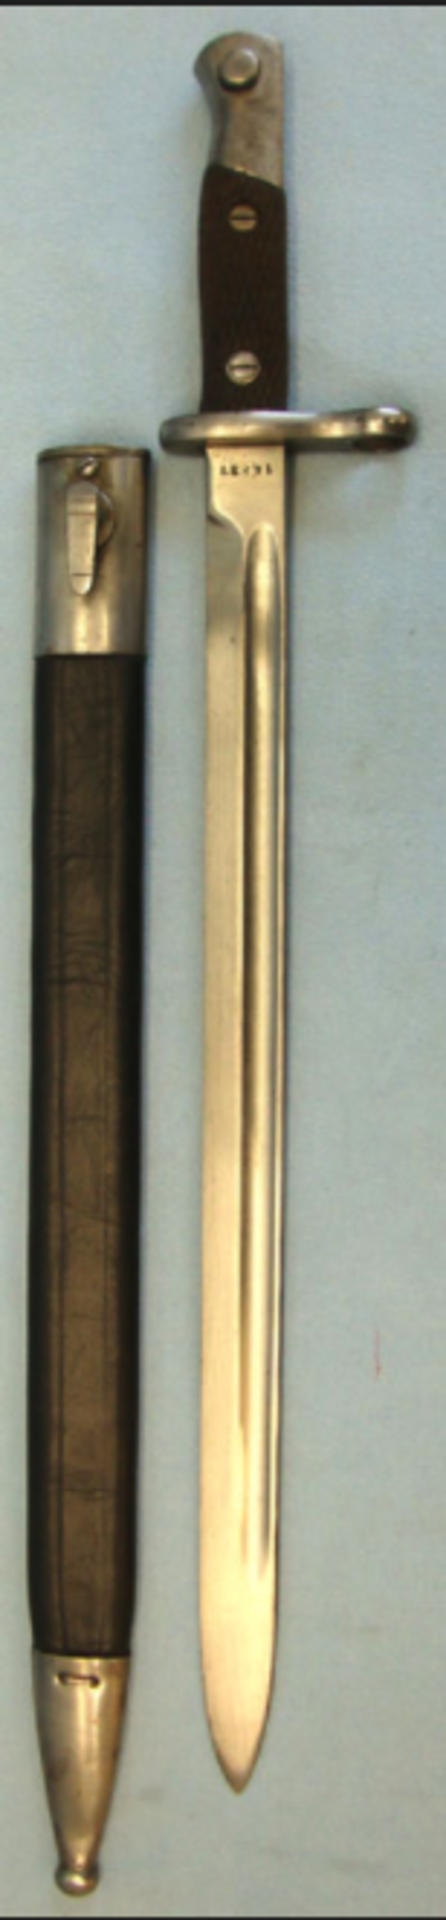 Spanish M1893 Sword Bayonet & Steel Mounted Leather Scabbard. - Image 3 of 3